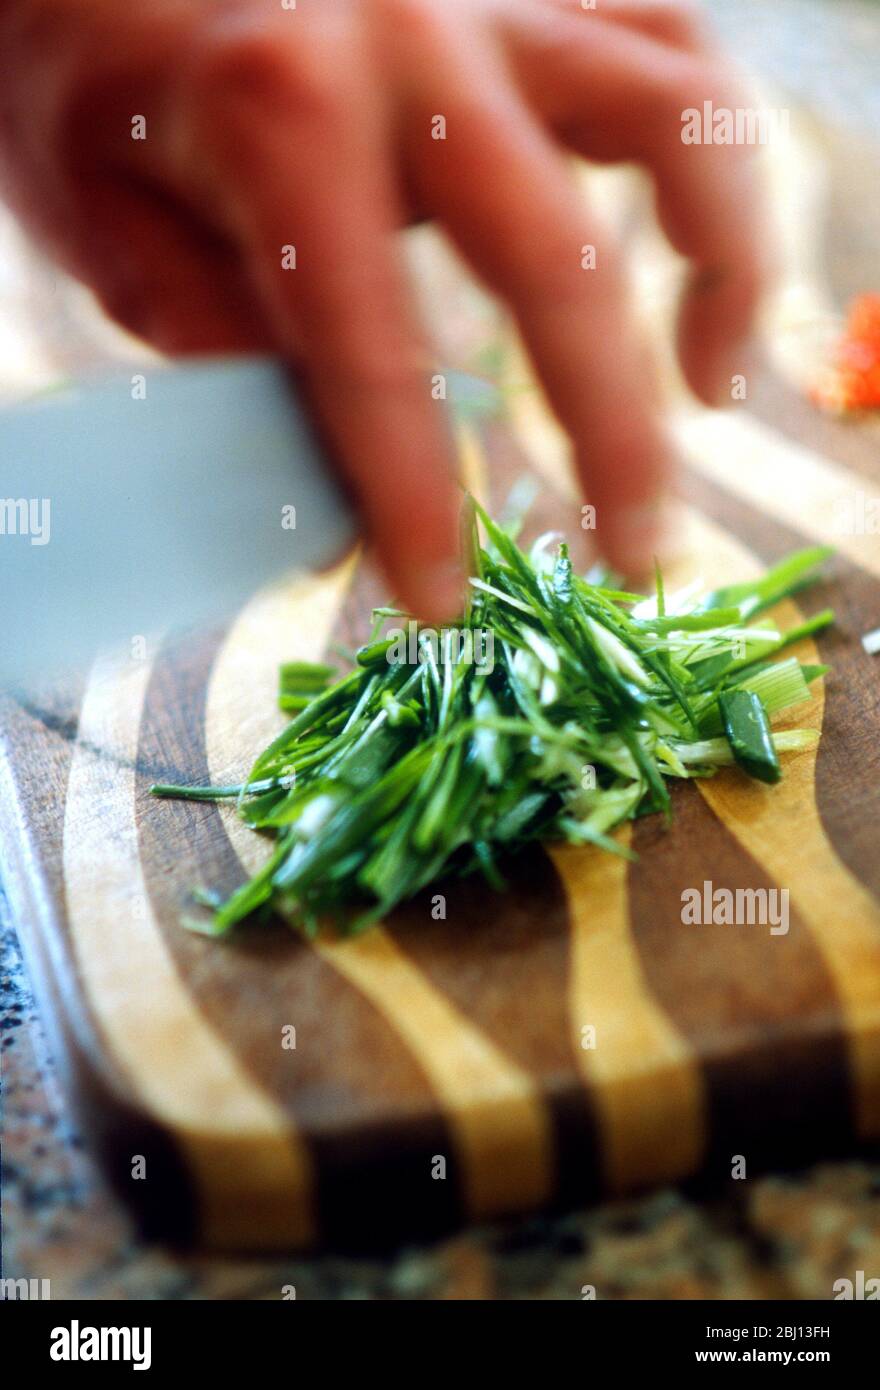 Chopping chives - Stock Photo